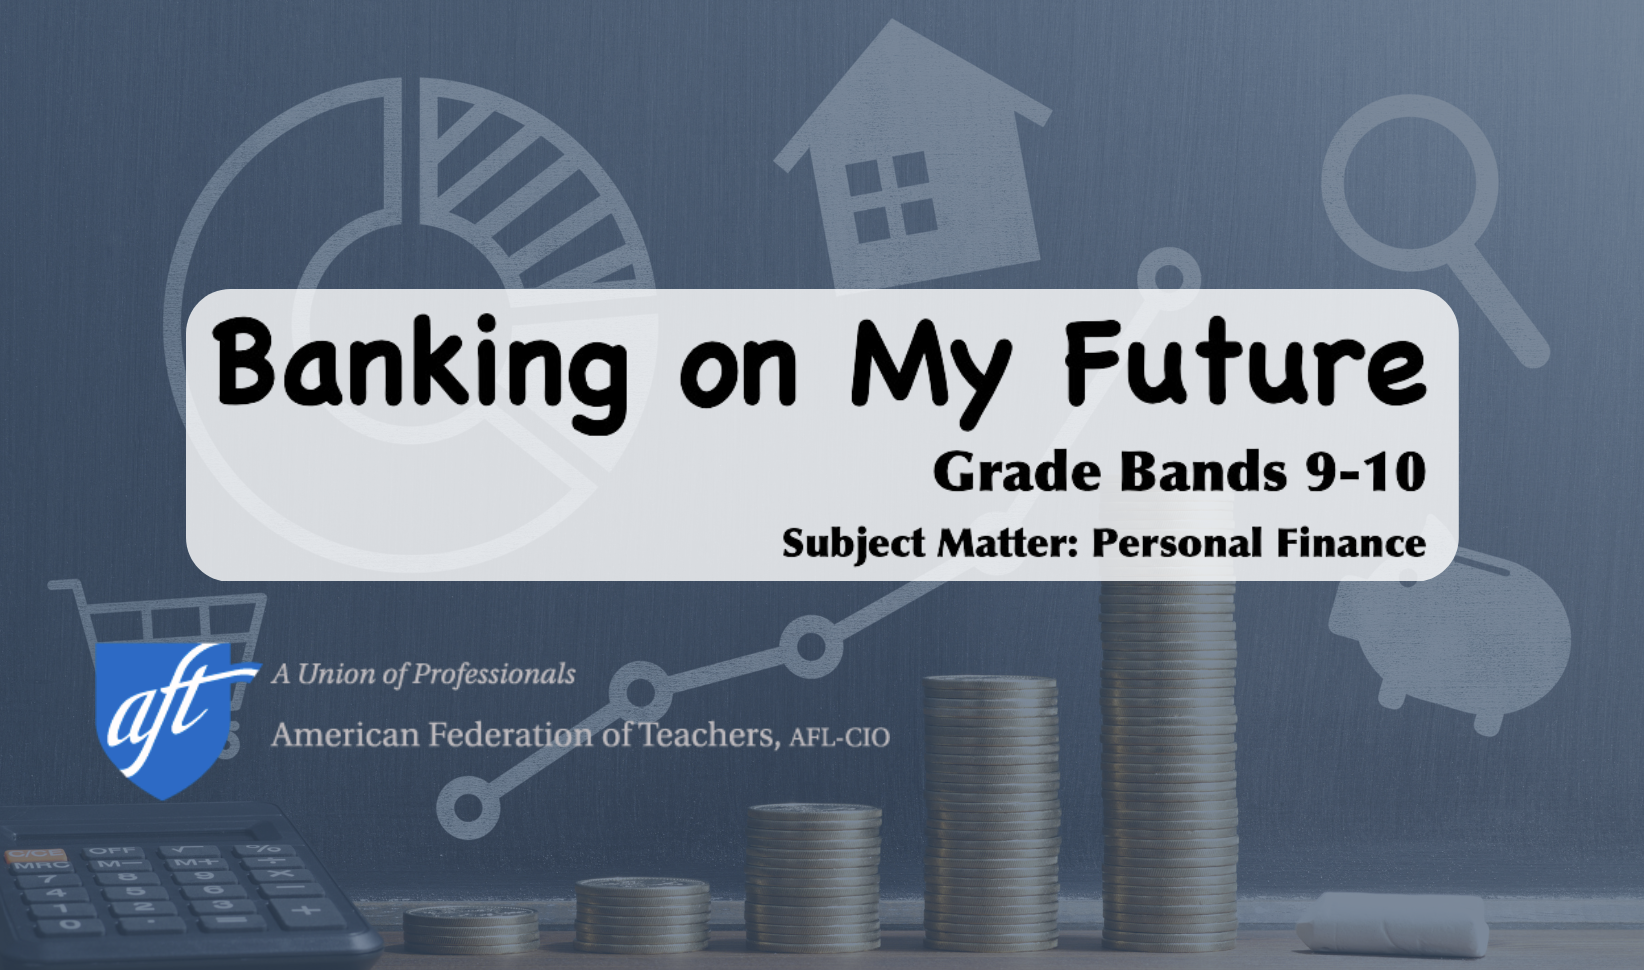 Project-Based Learning: Banking on My Future 